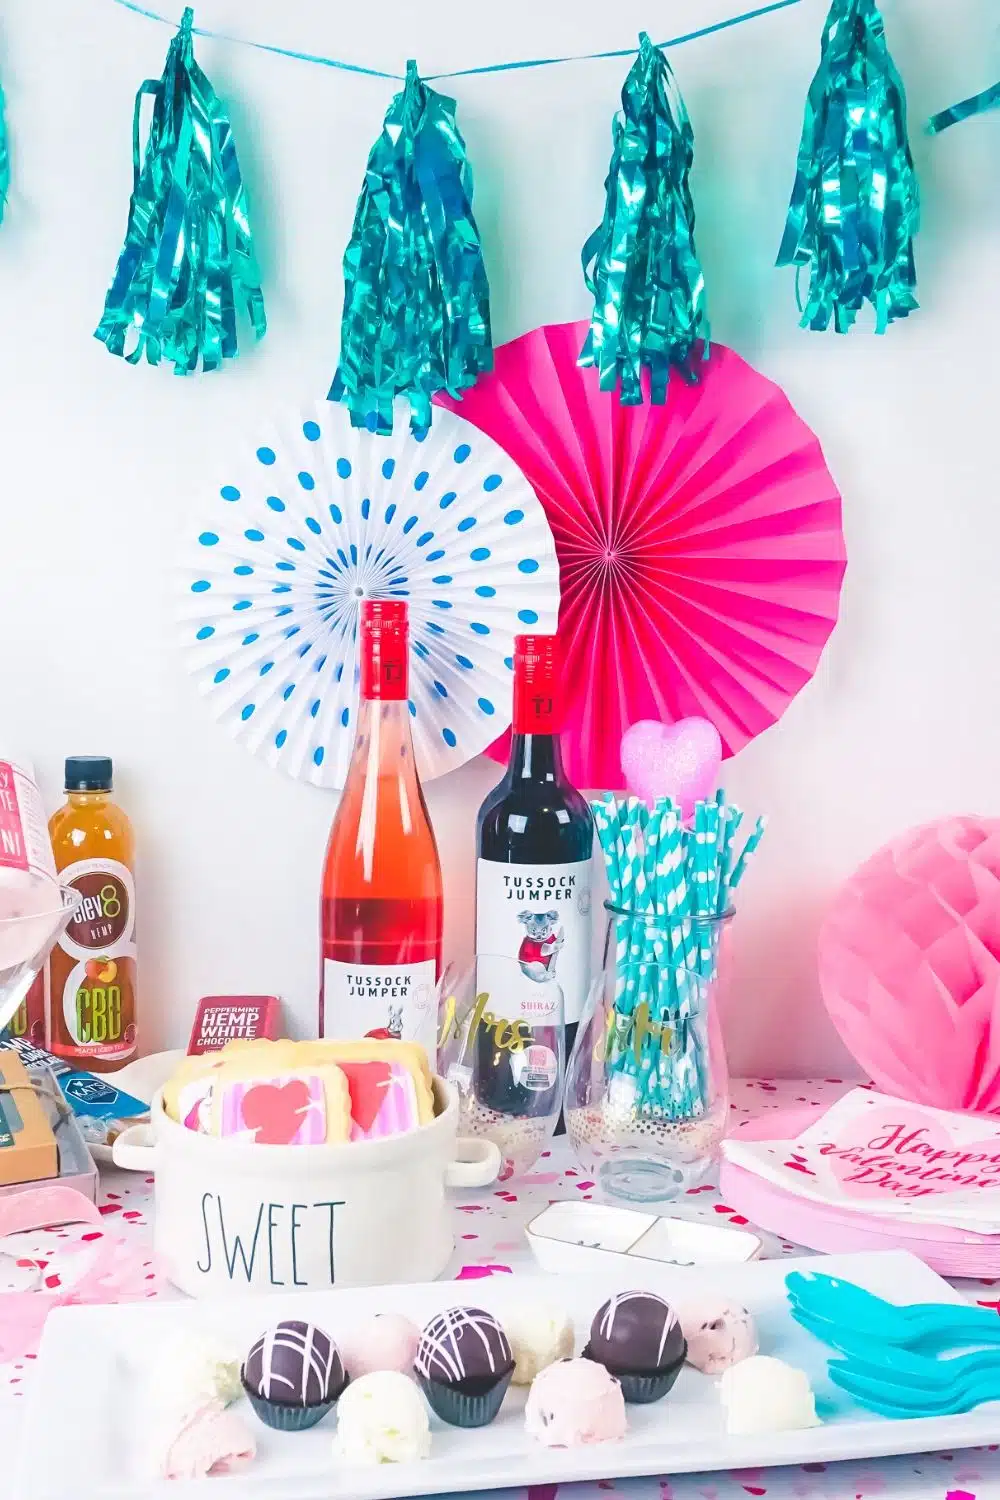 Valentine’s Day Gift Guide: Party Ideas & Gifts